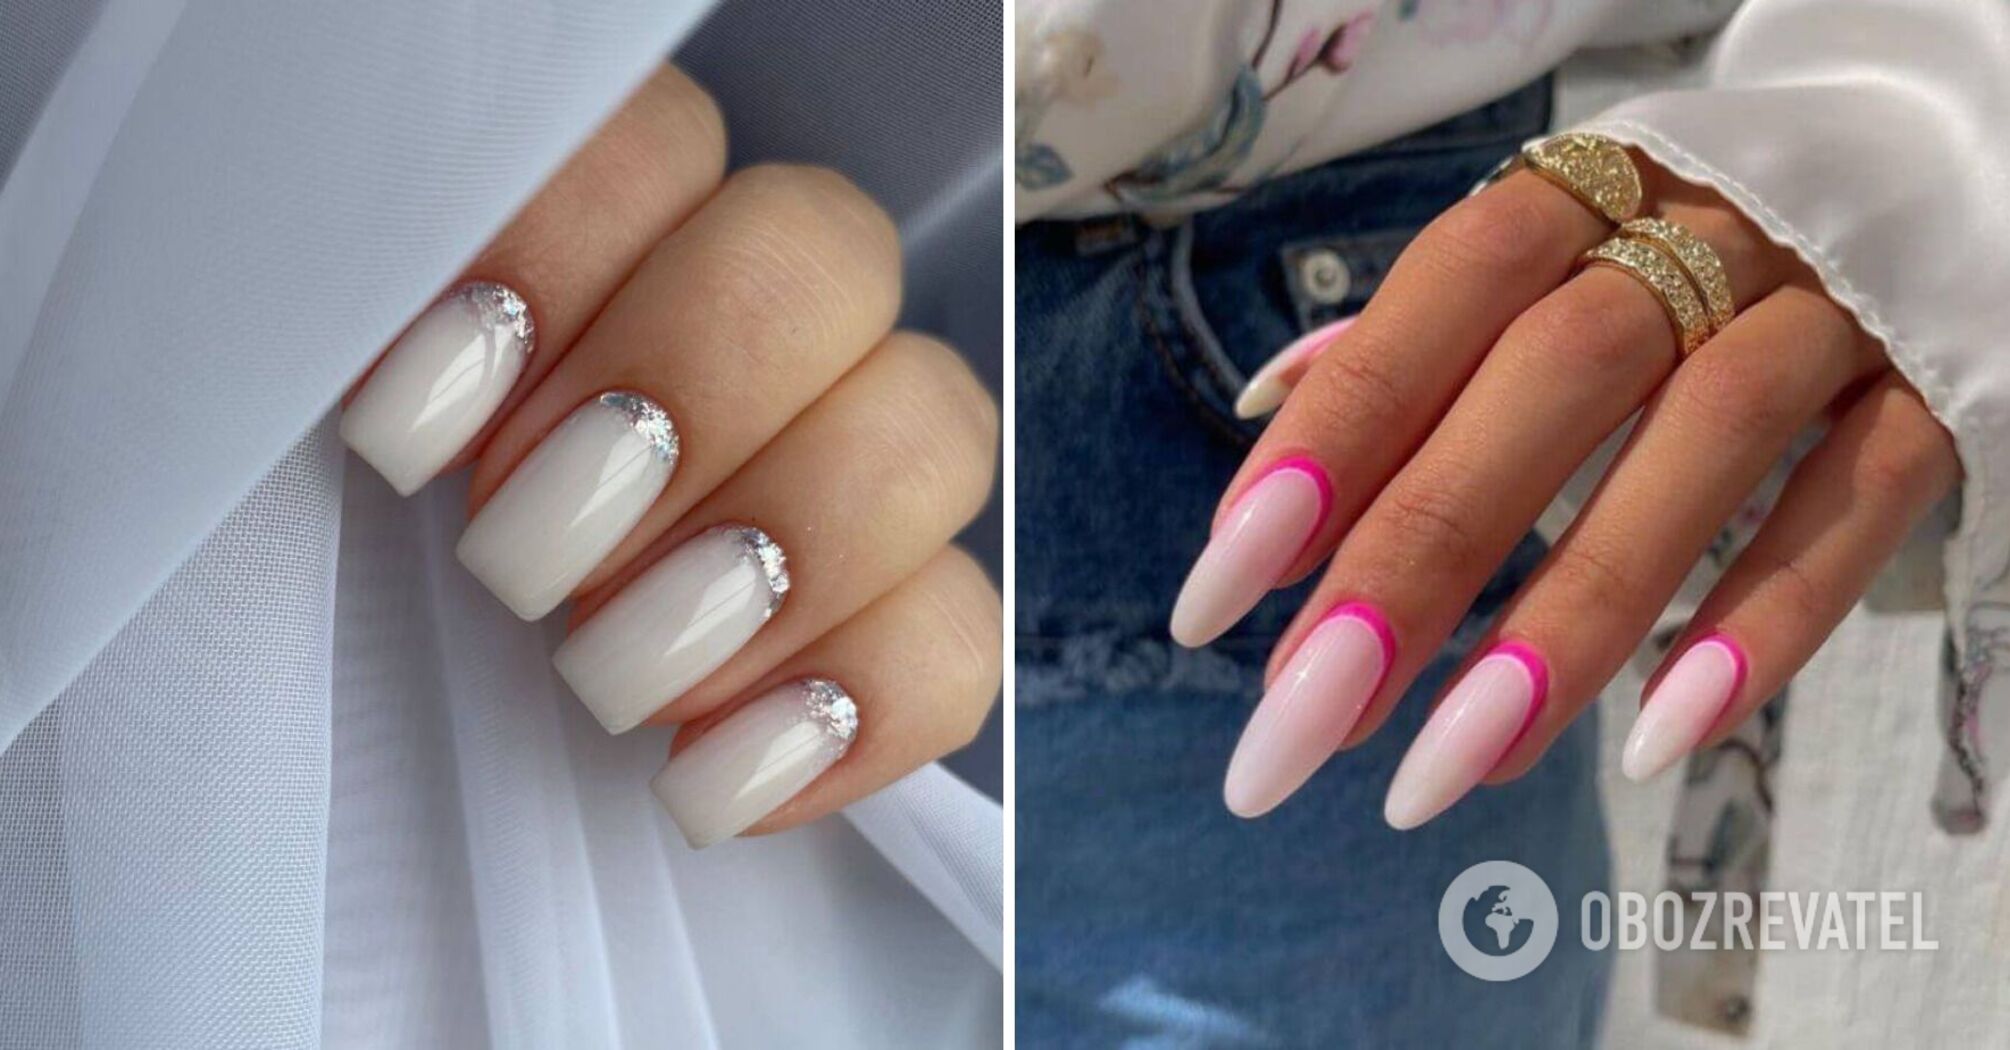 French manicure, but in reverse. 6 nail ideas for those who love originality